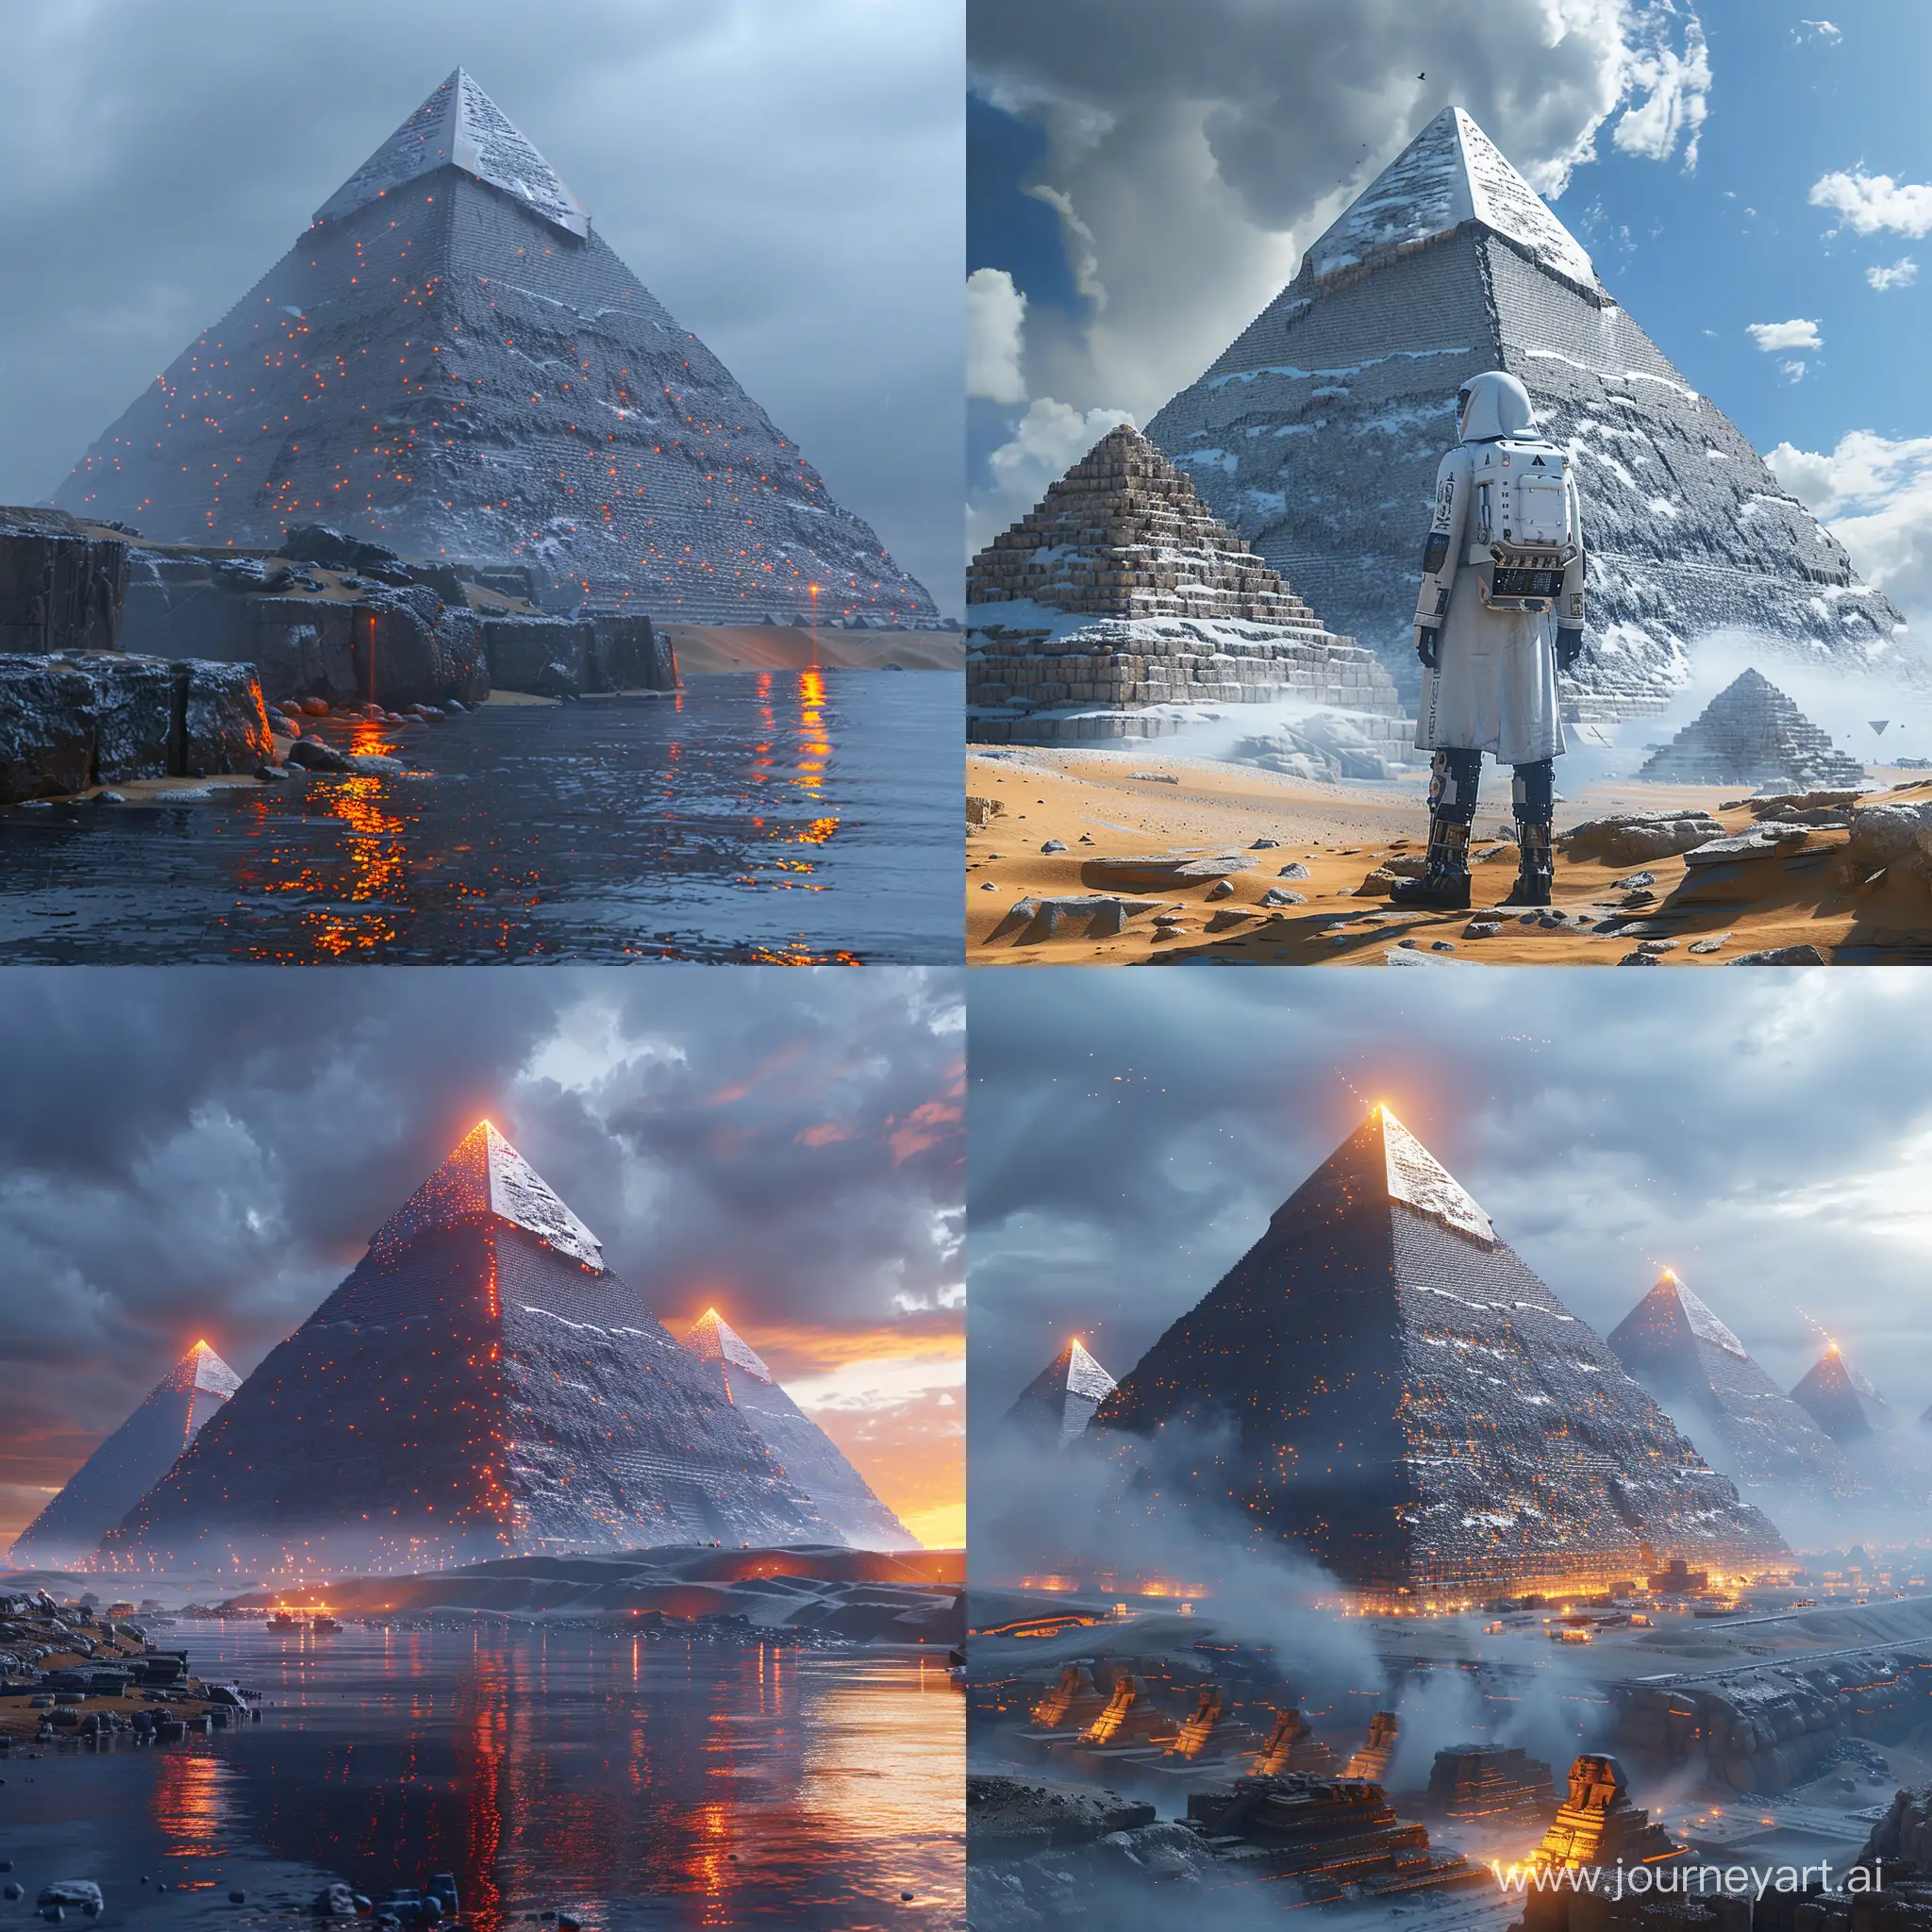 Futuristic-SciFi-HighTech-Egyptian-Pyramids-Advanced-Technology-and-Ancient-Wonders